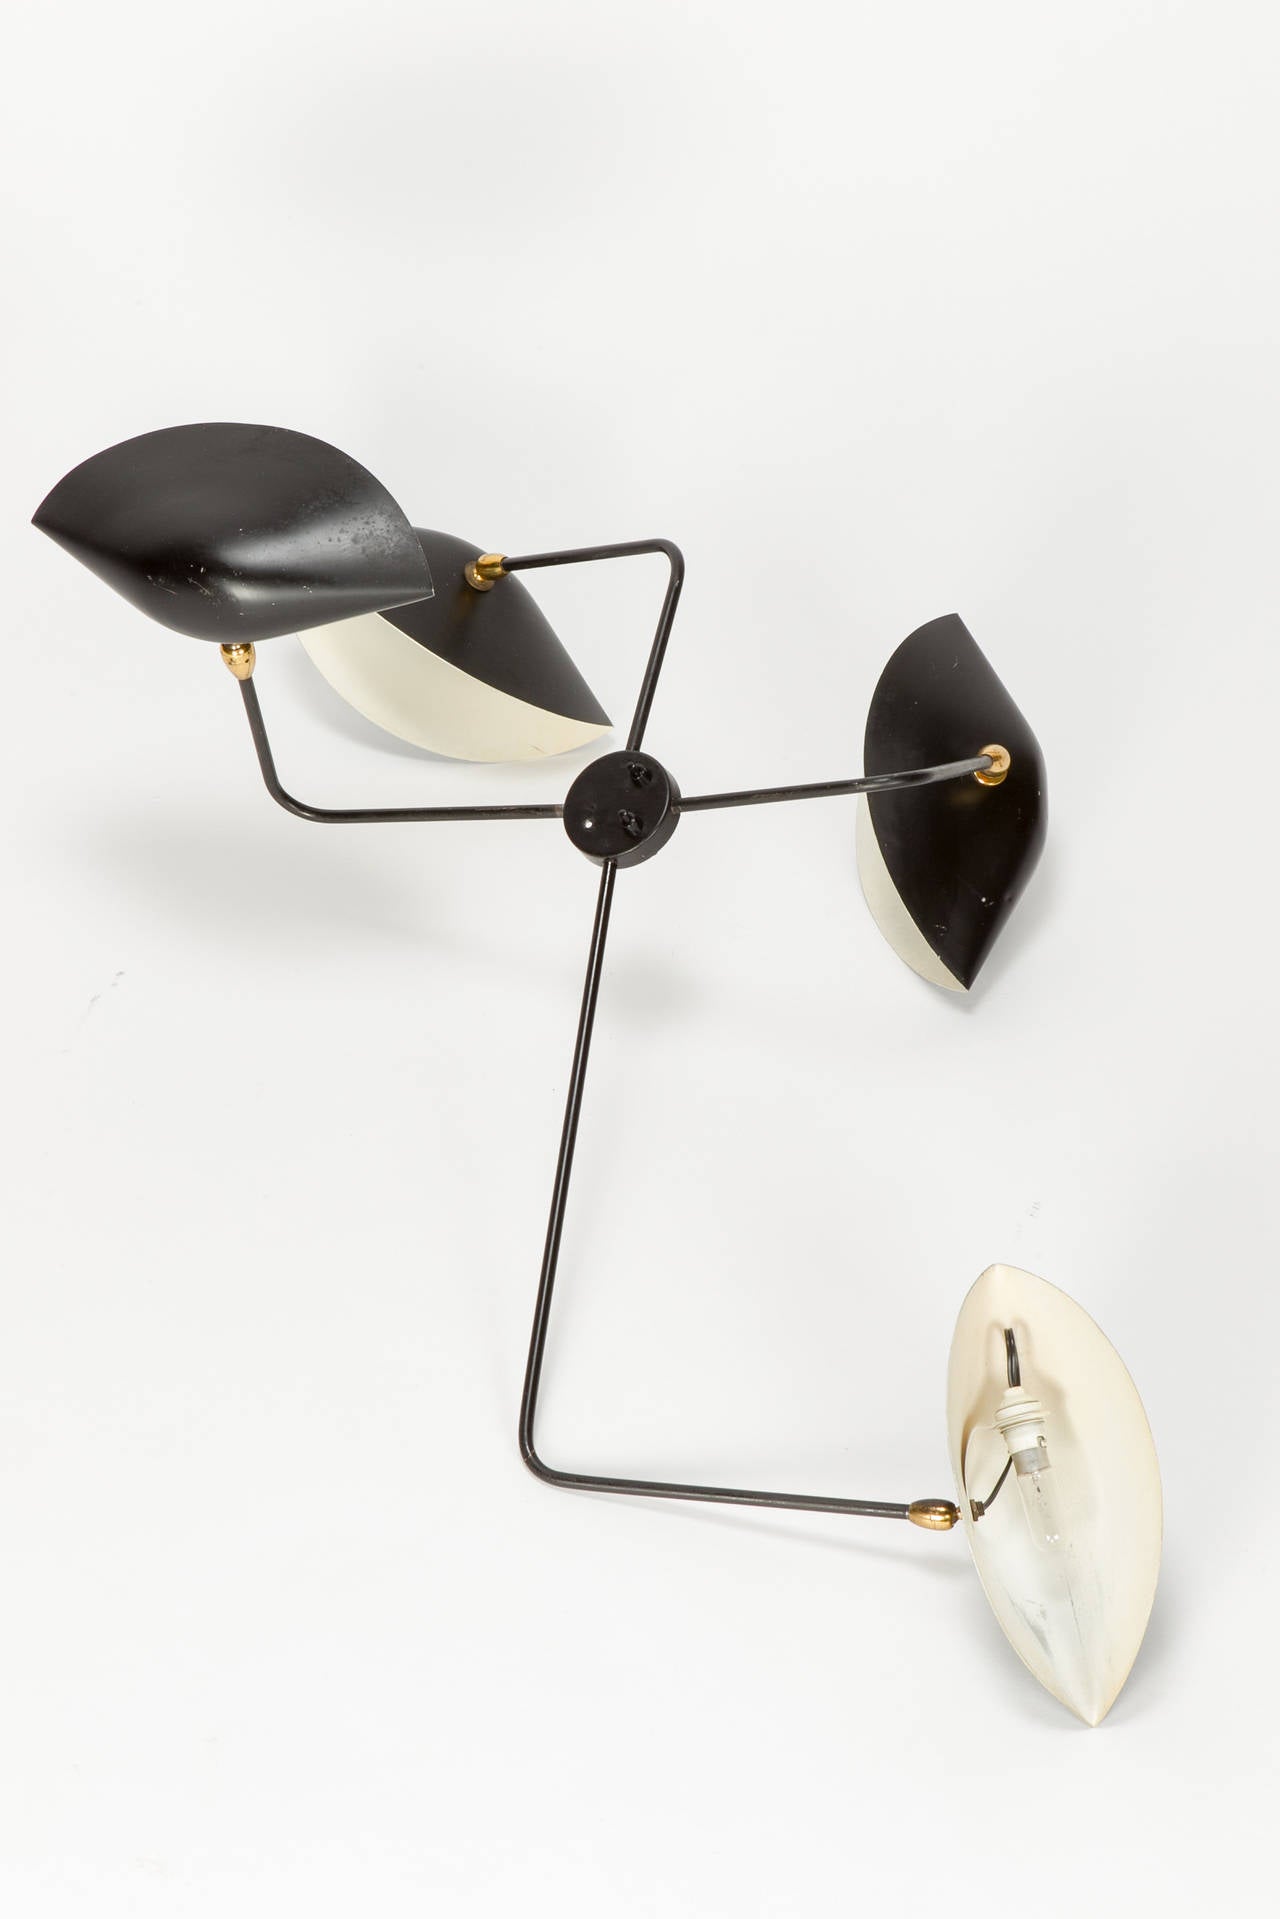 Very rare Serge Mouille wall lamp with four arms, originally from the 1950s, France!